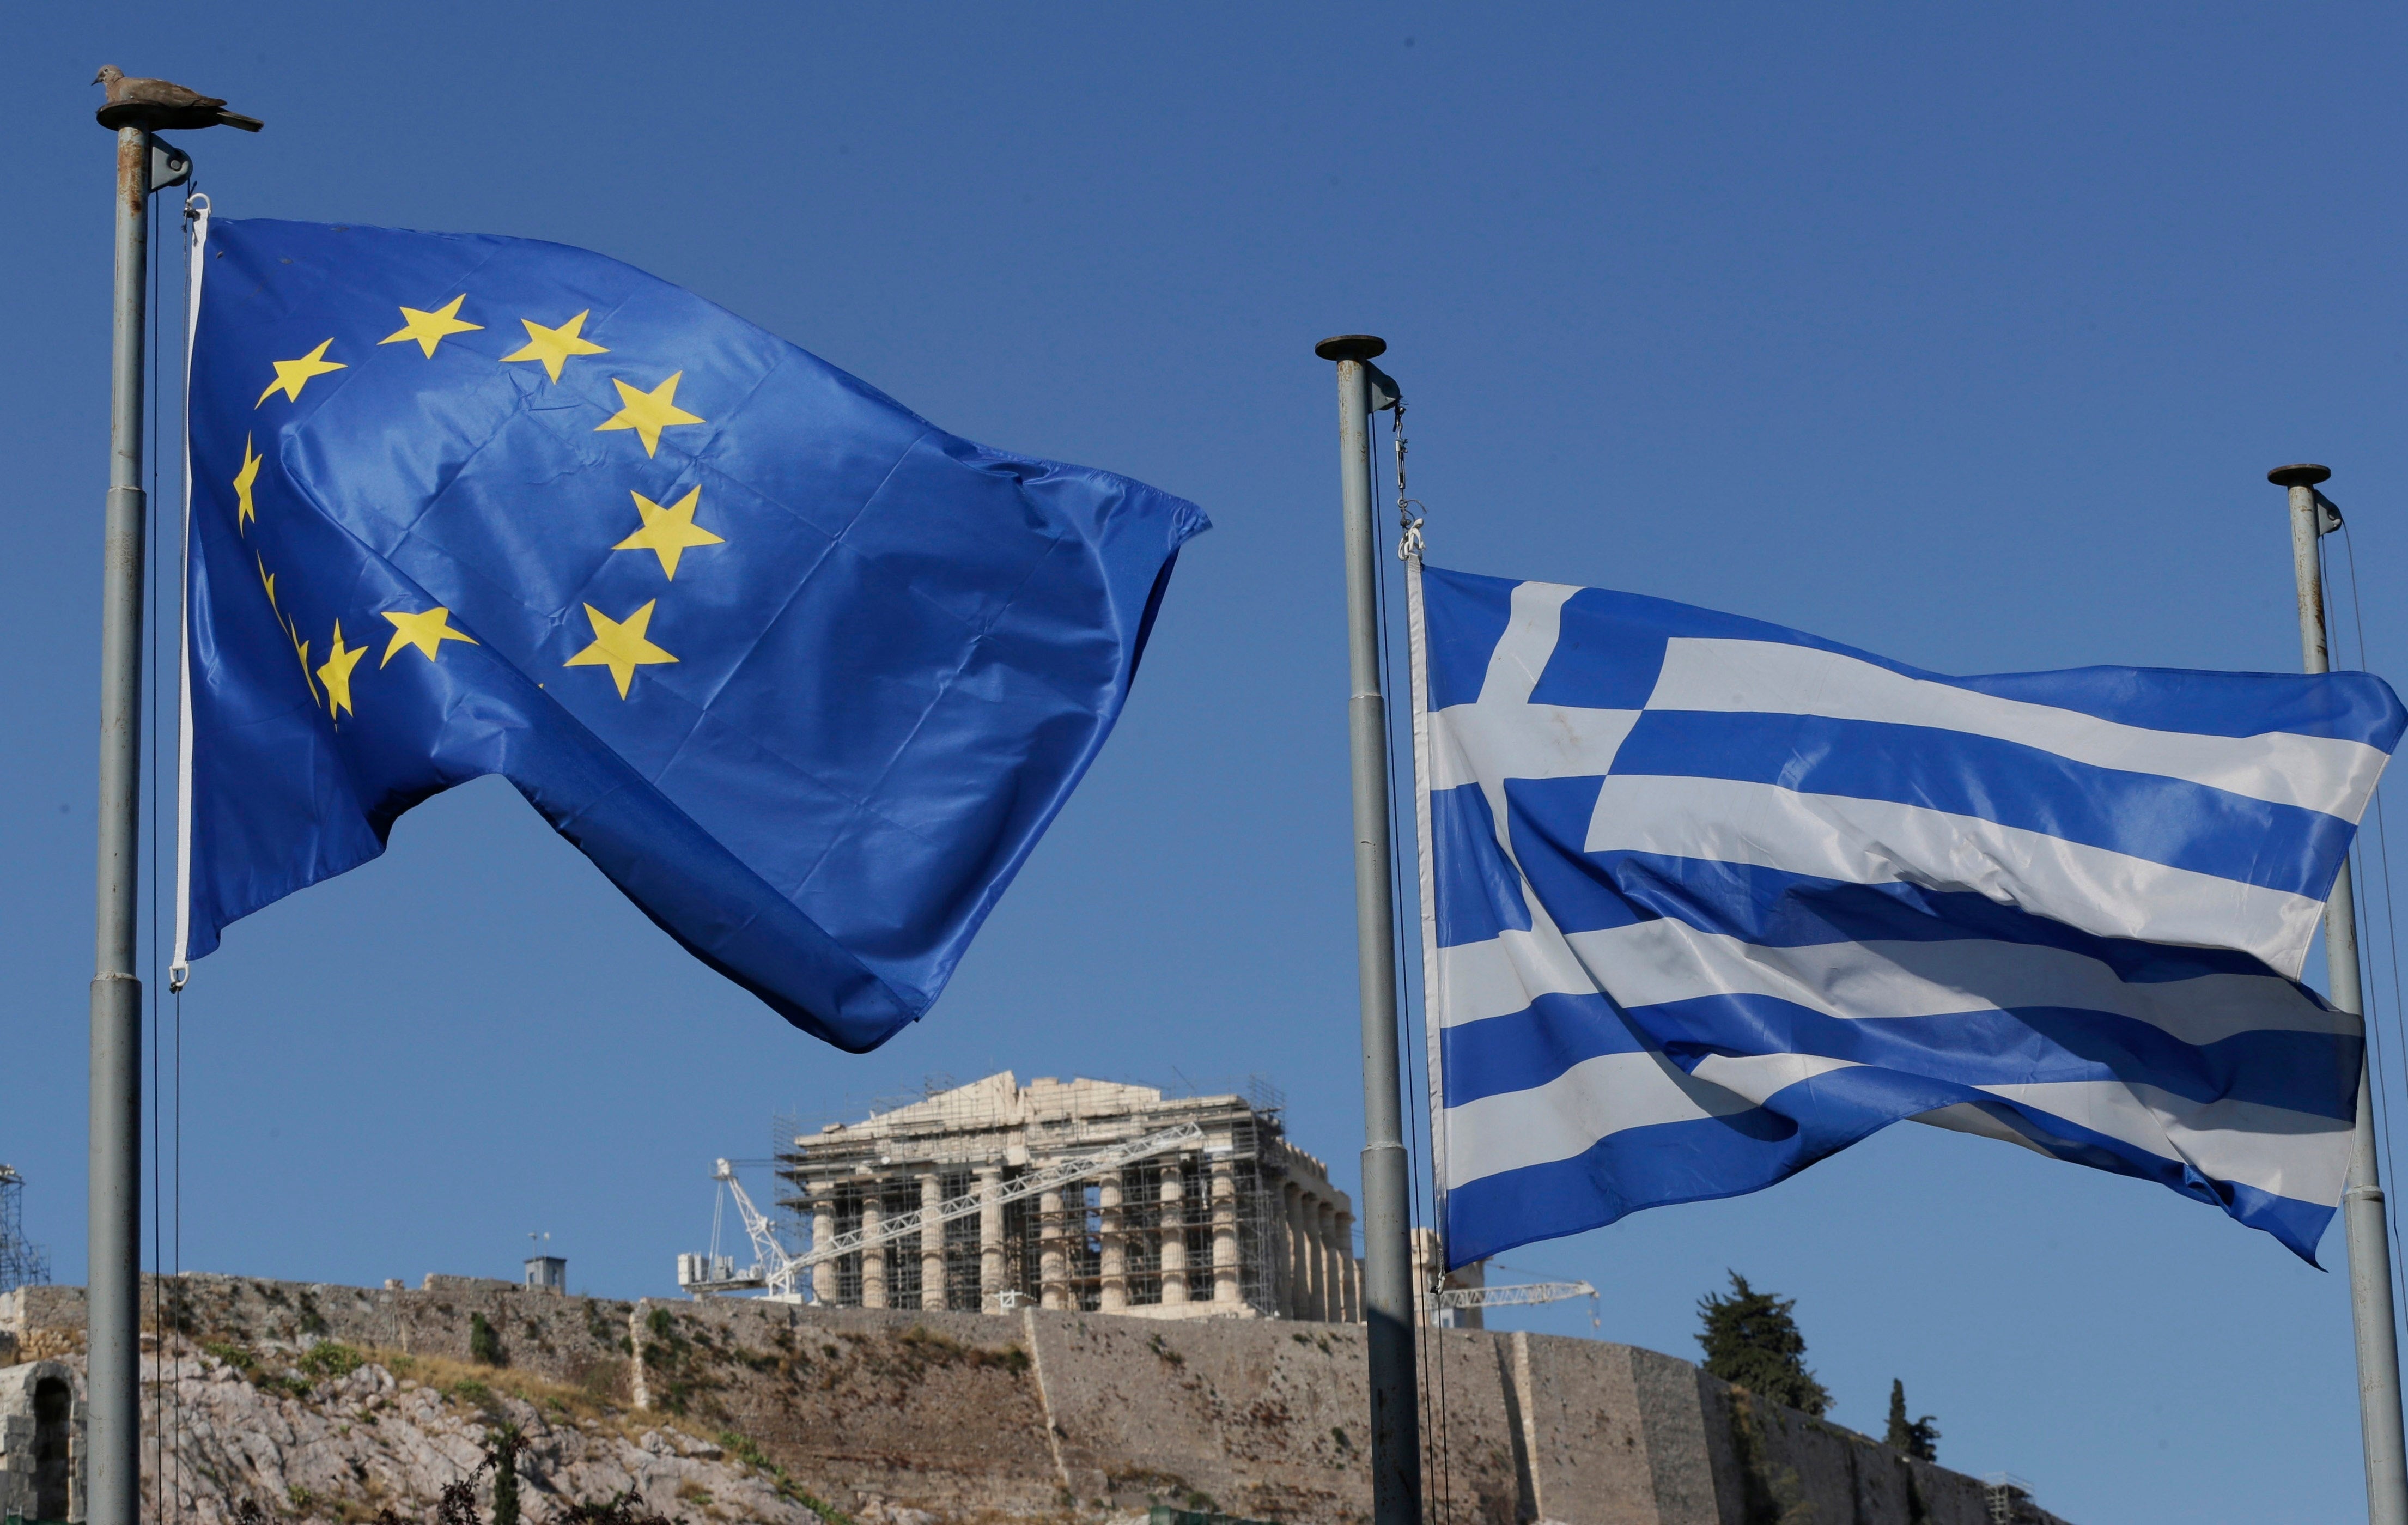 The Greek, right, and the European flags wave under the ancient Acropolis hill in Athens